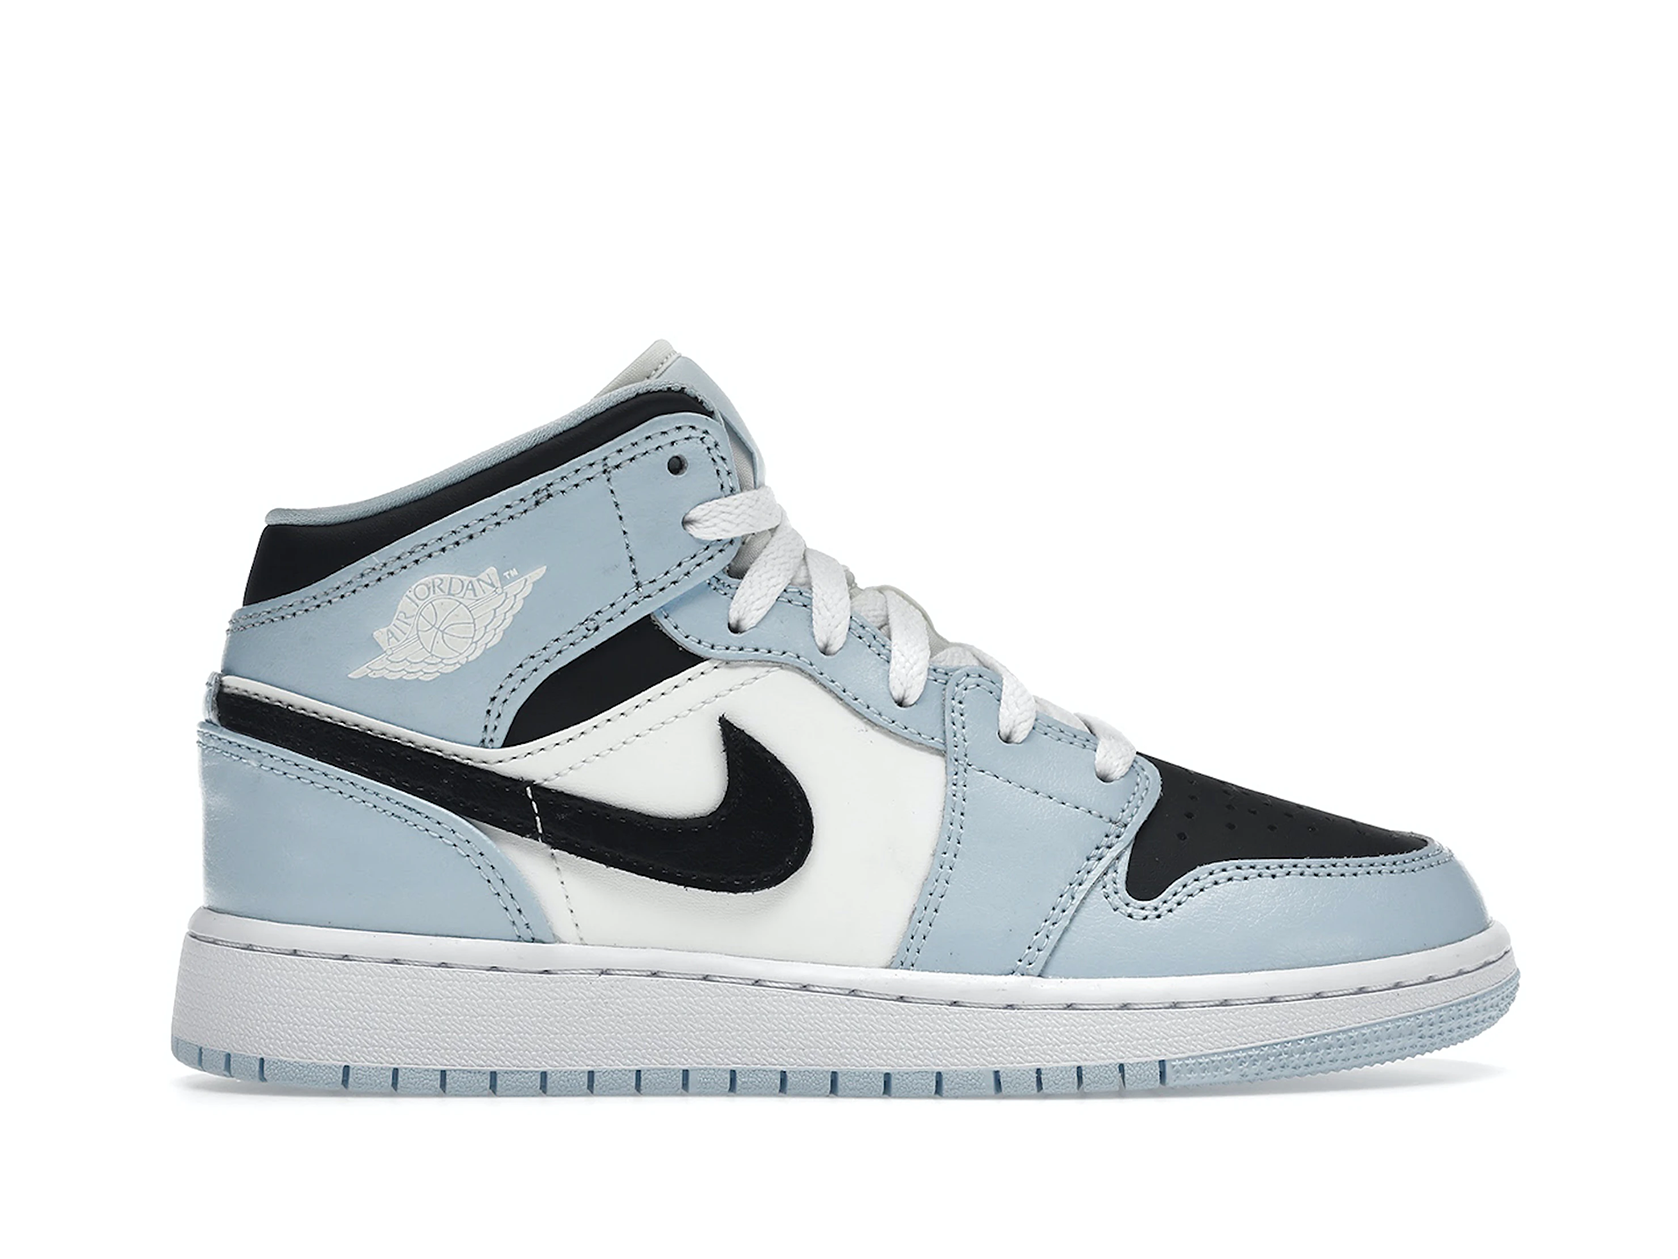 Double Boxed  169.99 Nike Air Jordan 1 Mid Ice Blue 2022 (GS) Double Boxed